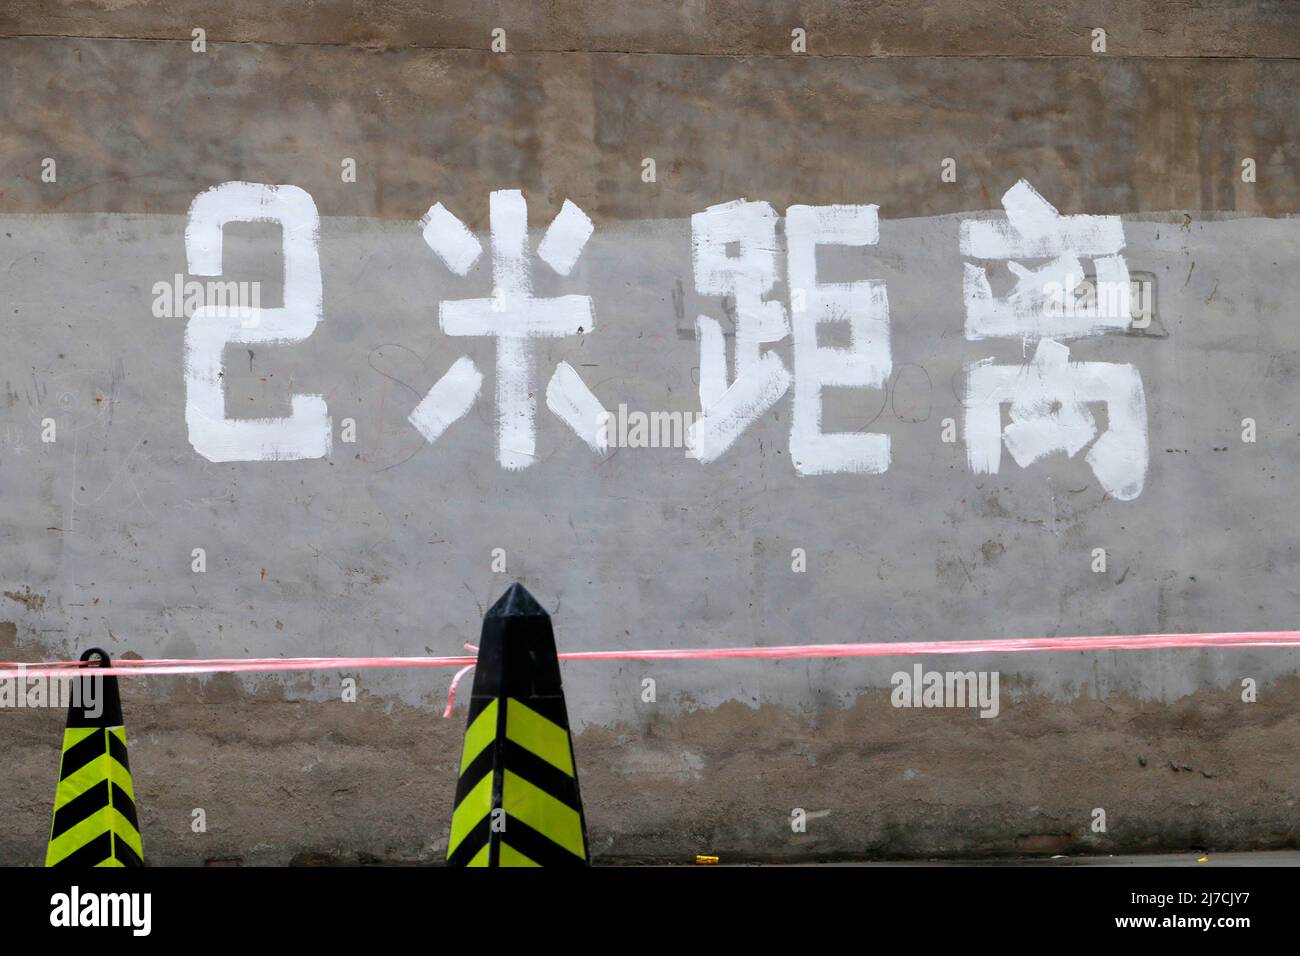 BEIJING, CHINA - MAY 8, 2022 - Photo taken on May 8, 2022 shows a notice to keep a distance of 2 meters at the nucleic acid testing site in Baiduizi C Stock Photo